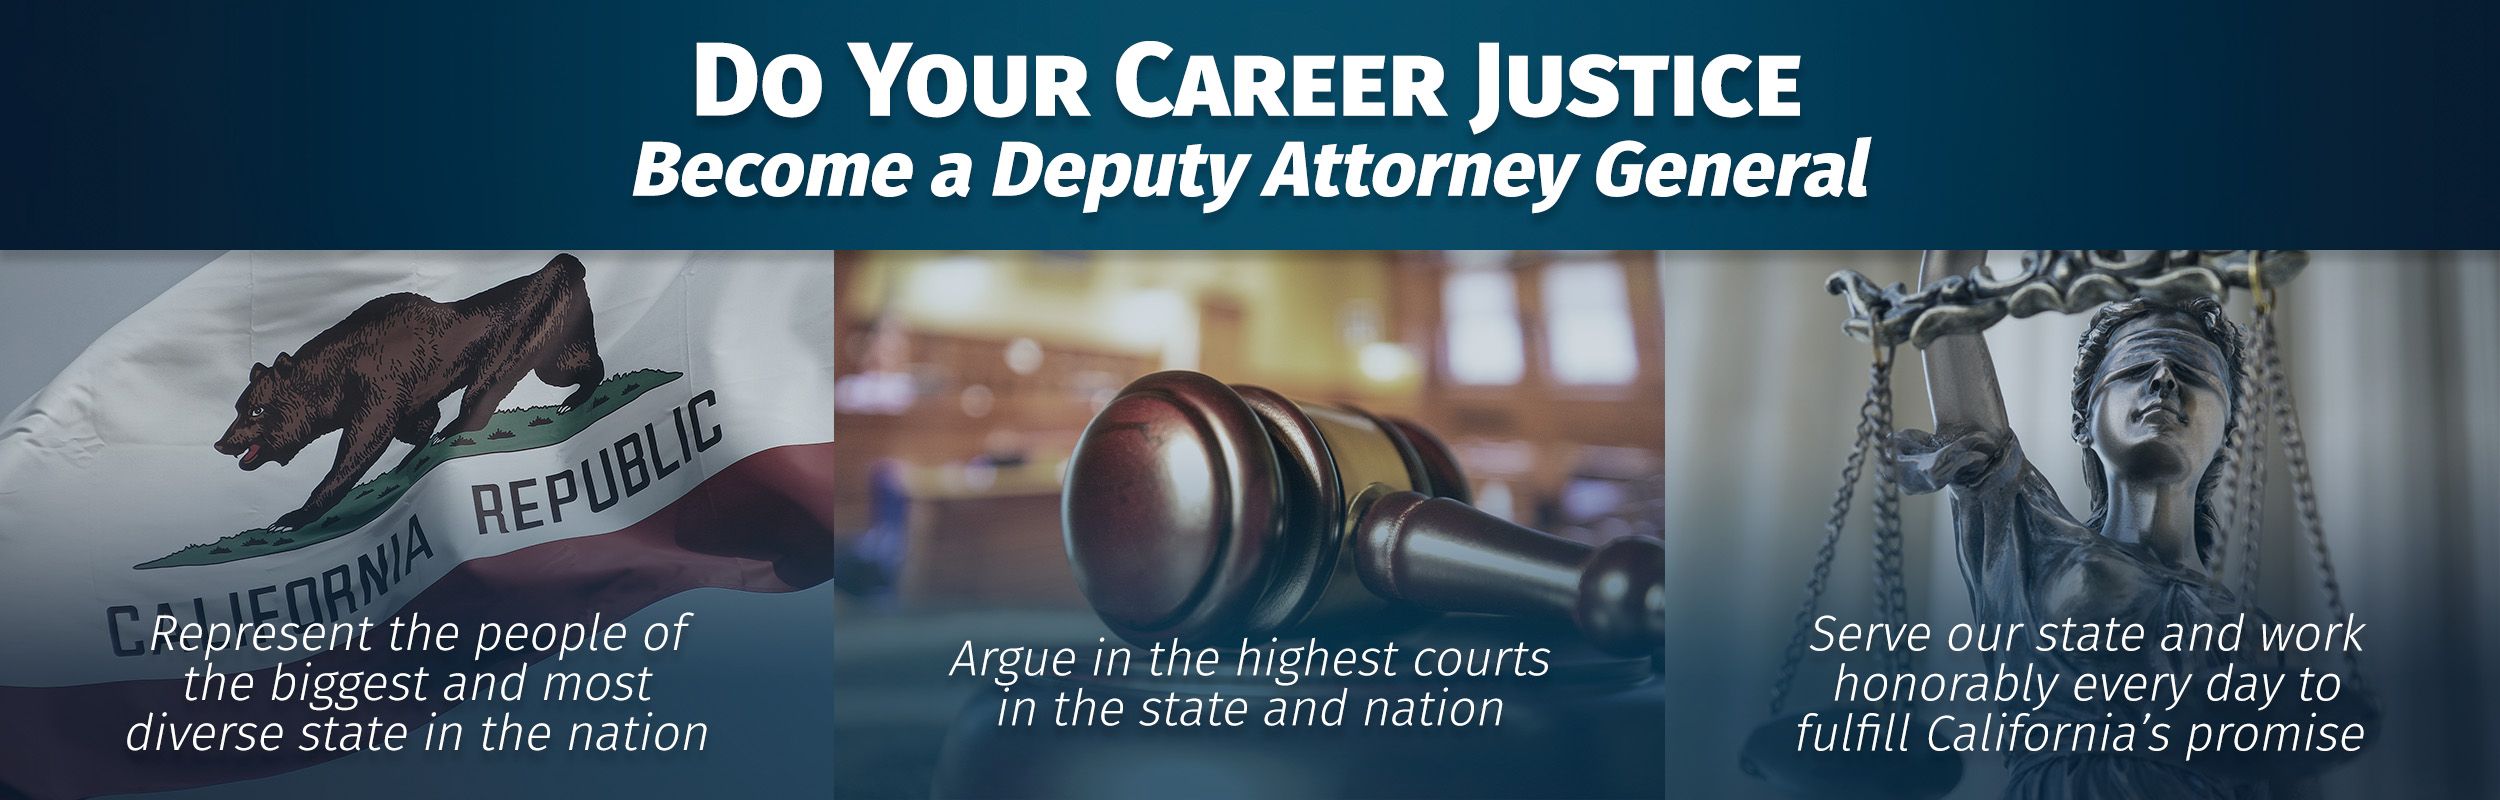 Do Your Career Justice - Become a Deputy Attorney General